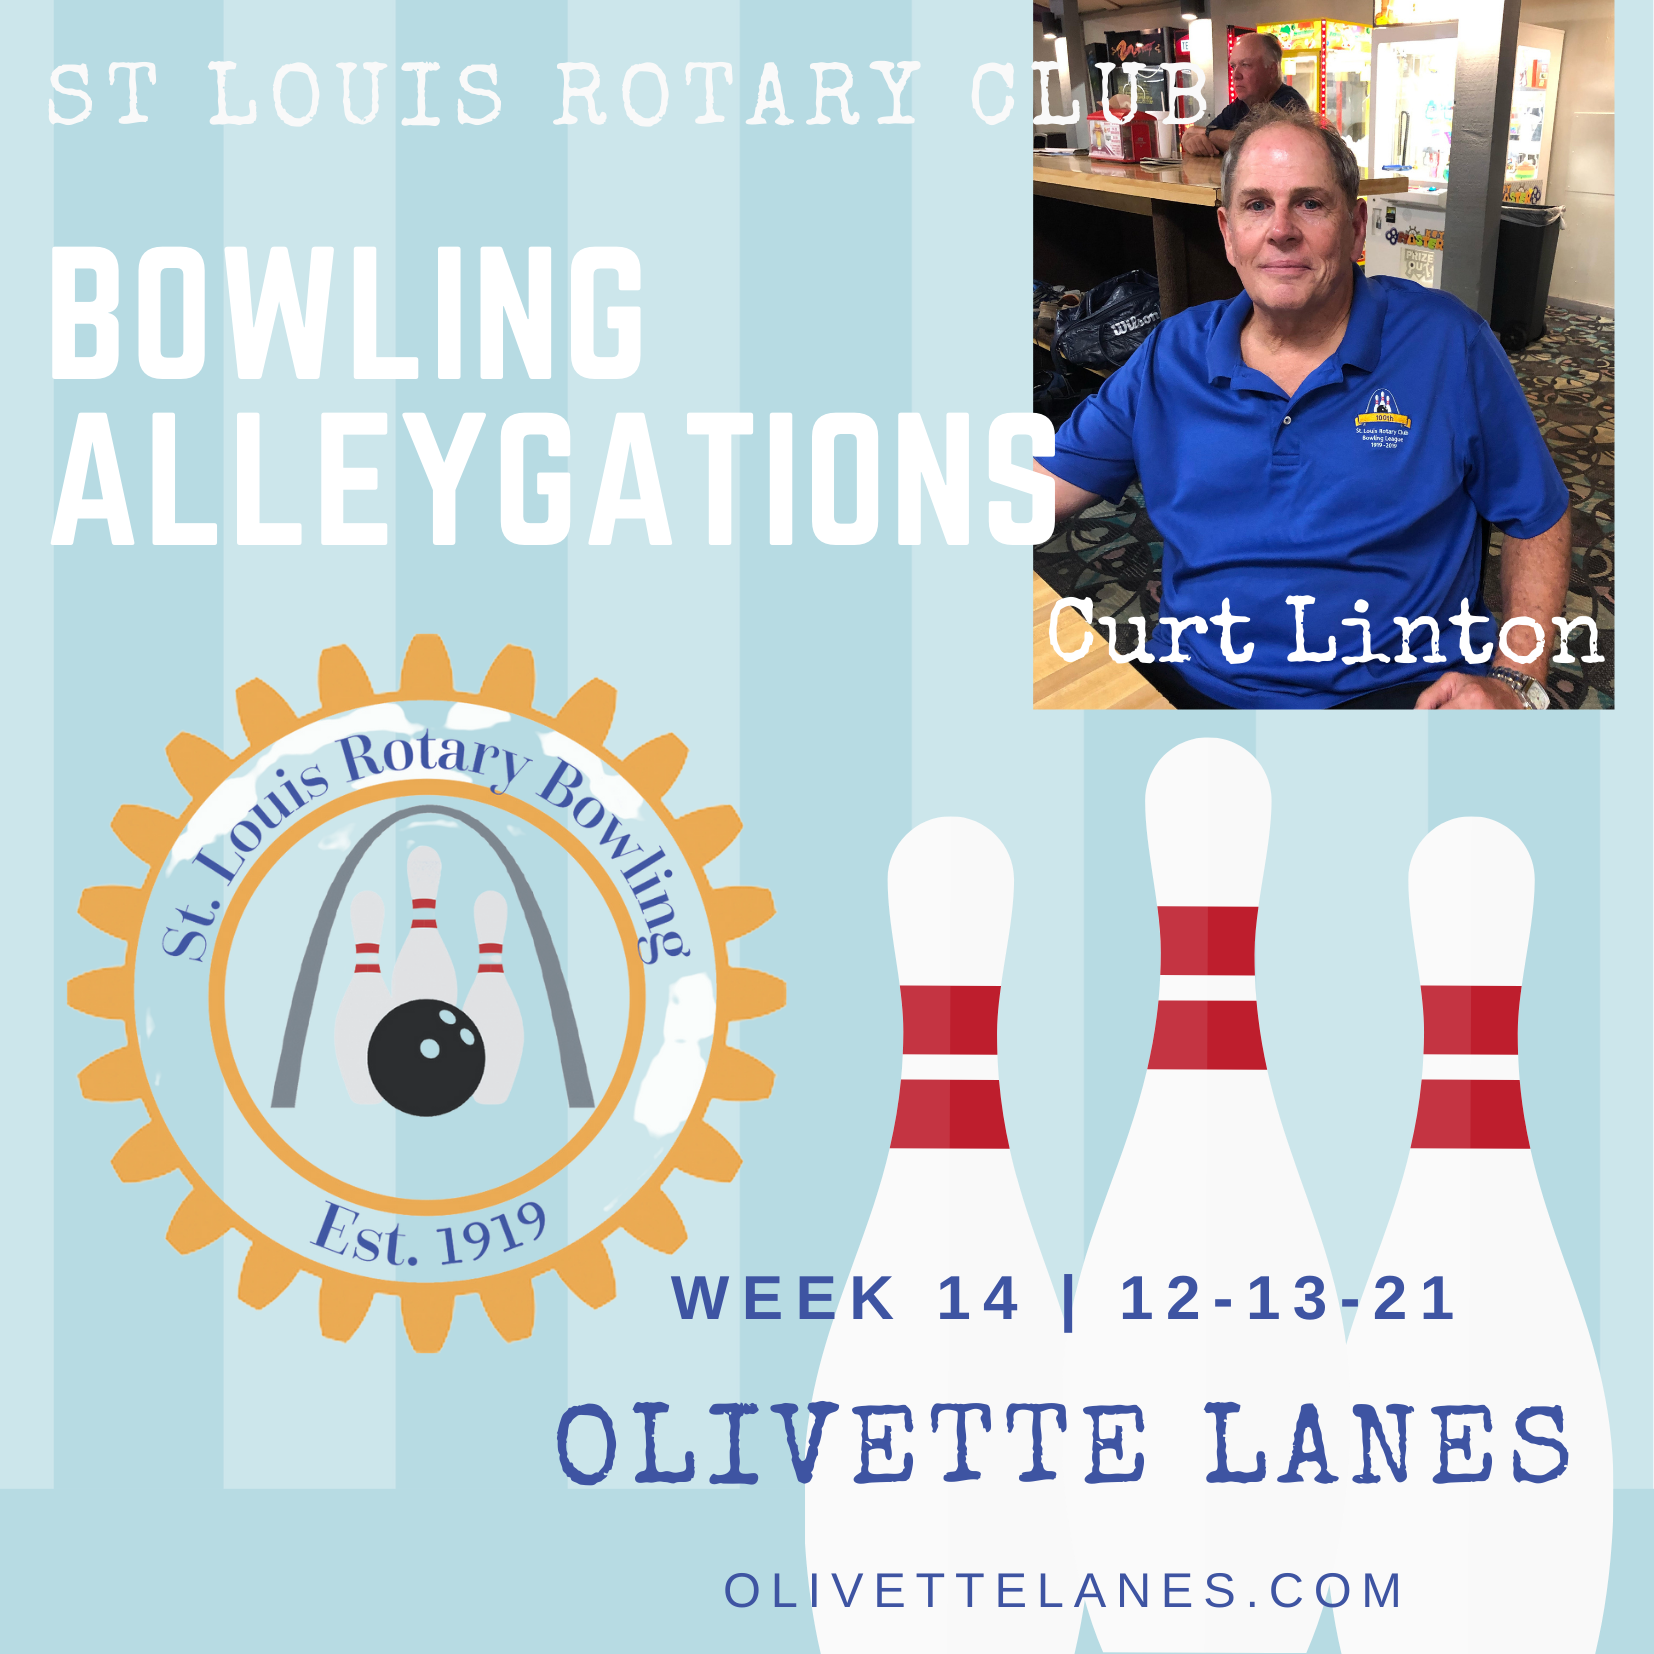 Curt Linton - Bowling Alleygations 12-13-21